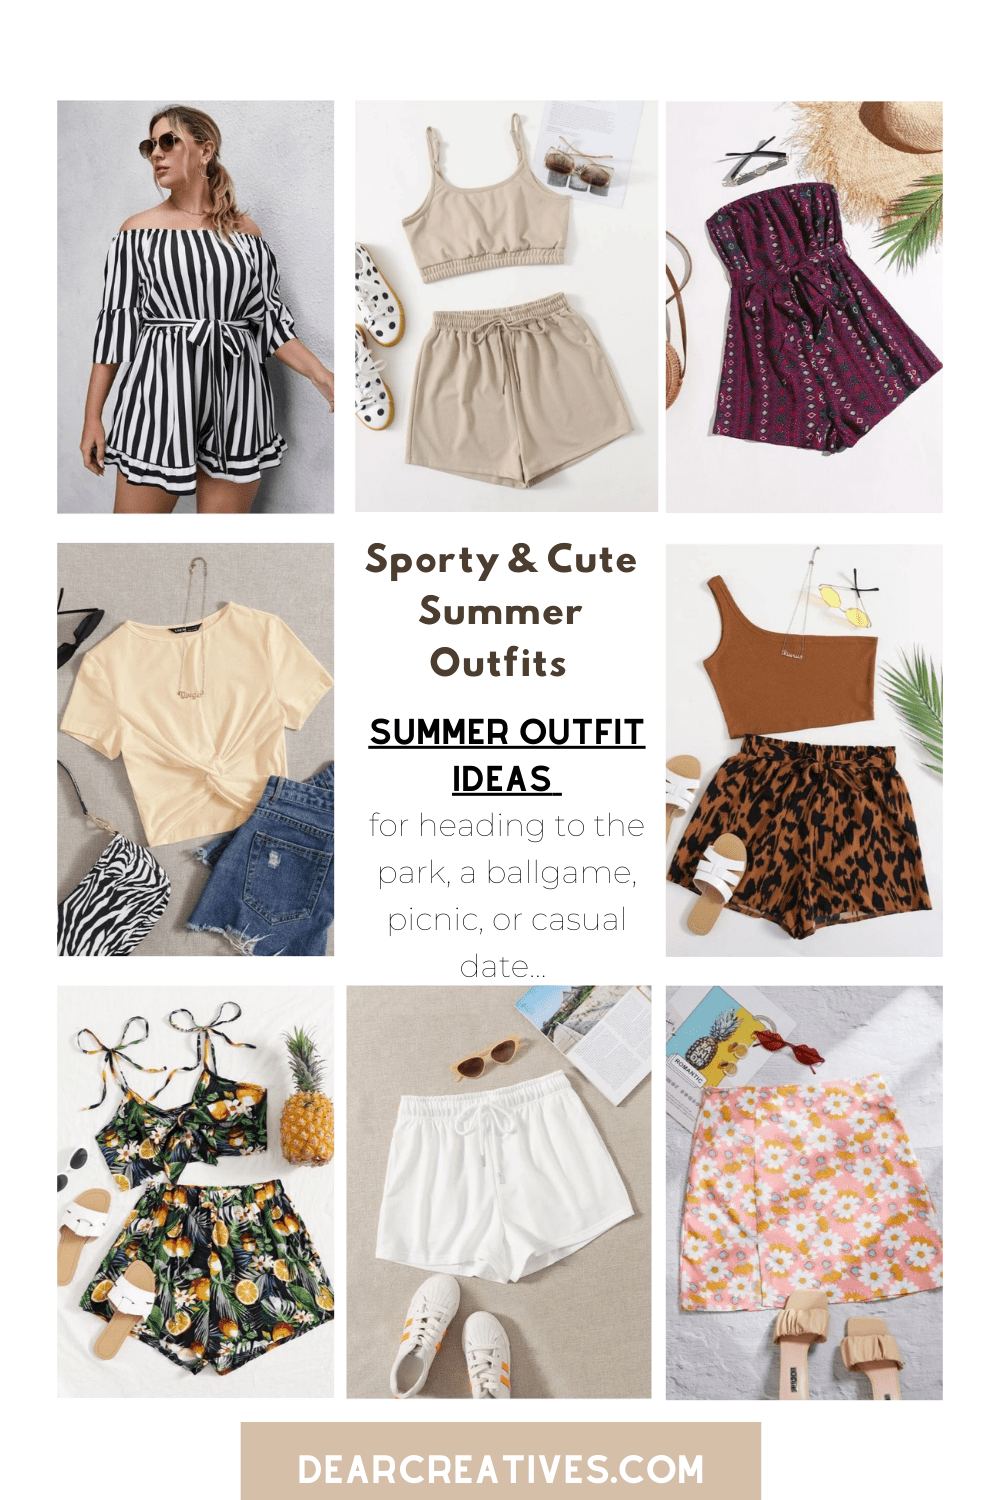 https://www.dearcreatives.com/wp-content/uploads/2021/06/Casual-Summer-Fashion-Trends-Sporty-summer-fashions-and-casual-summer-fashions...-DearCreatives.com-.png